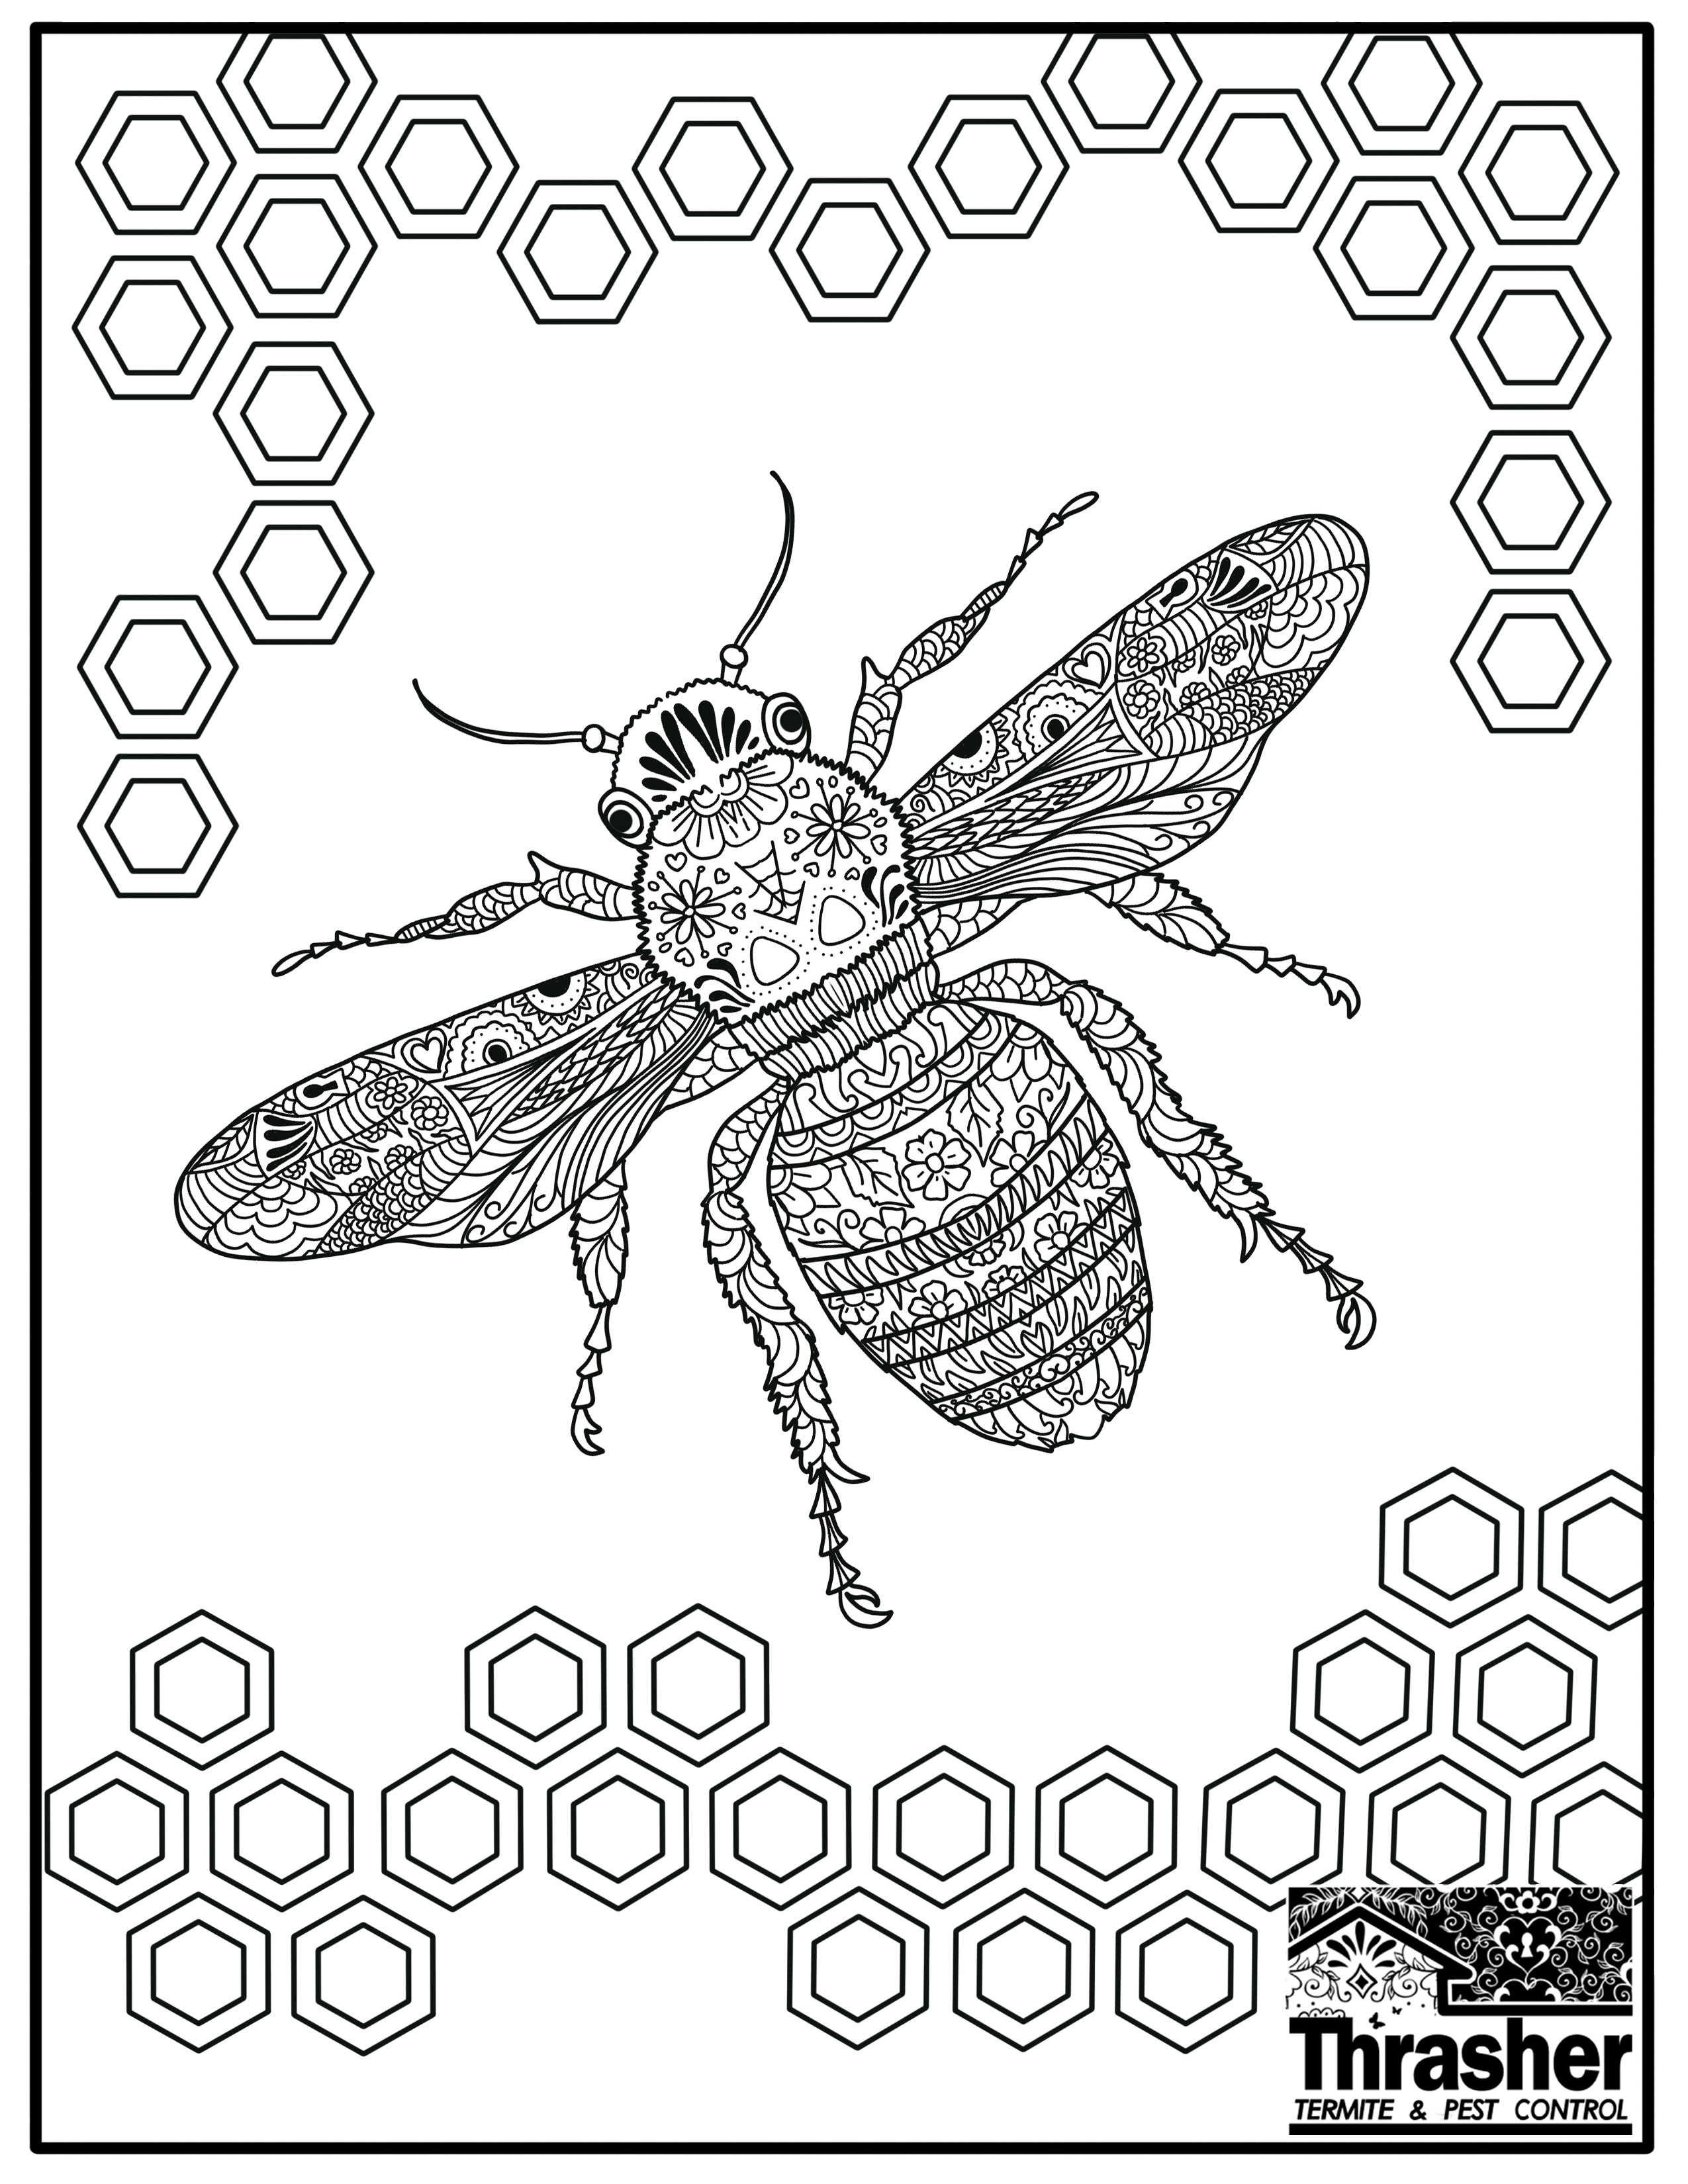 Bee Coloring Page | Thrasher Termite & Pest Control